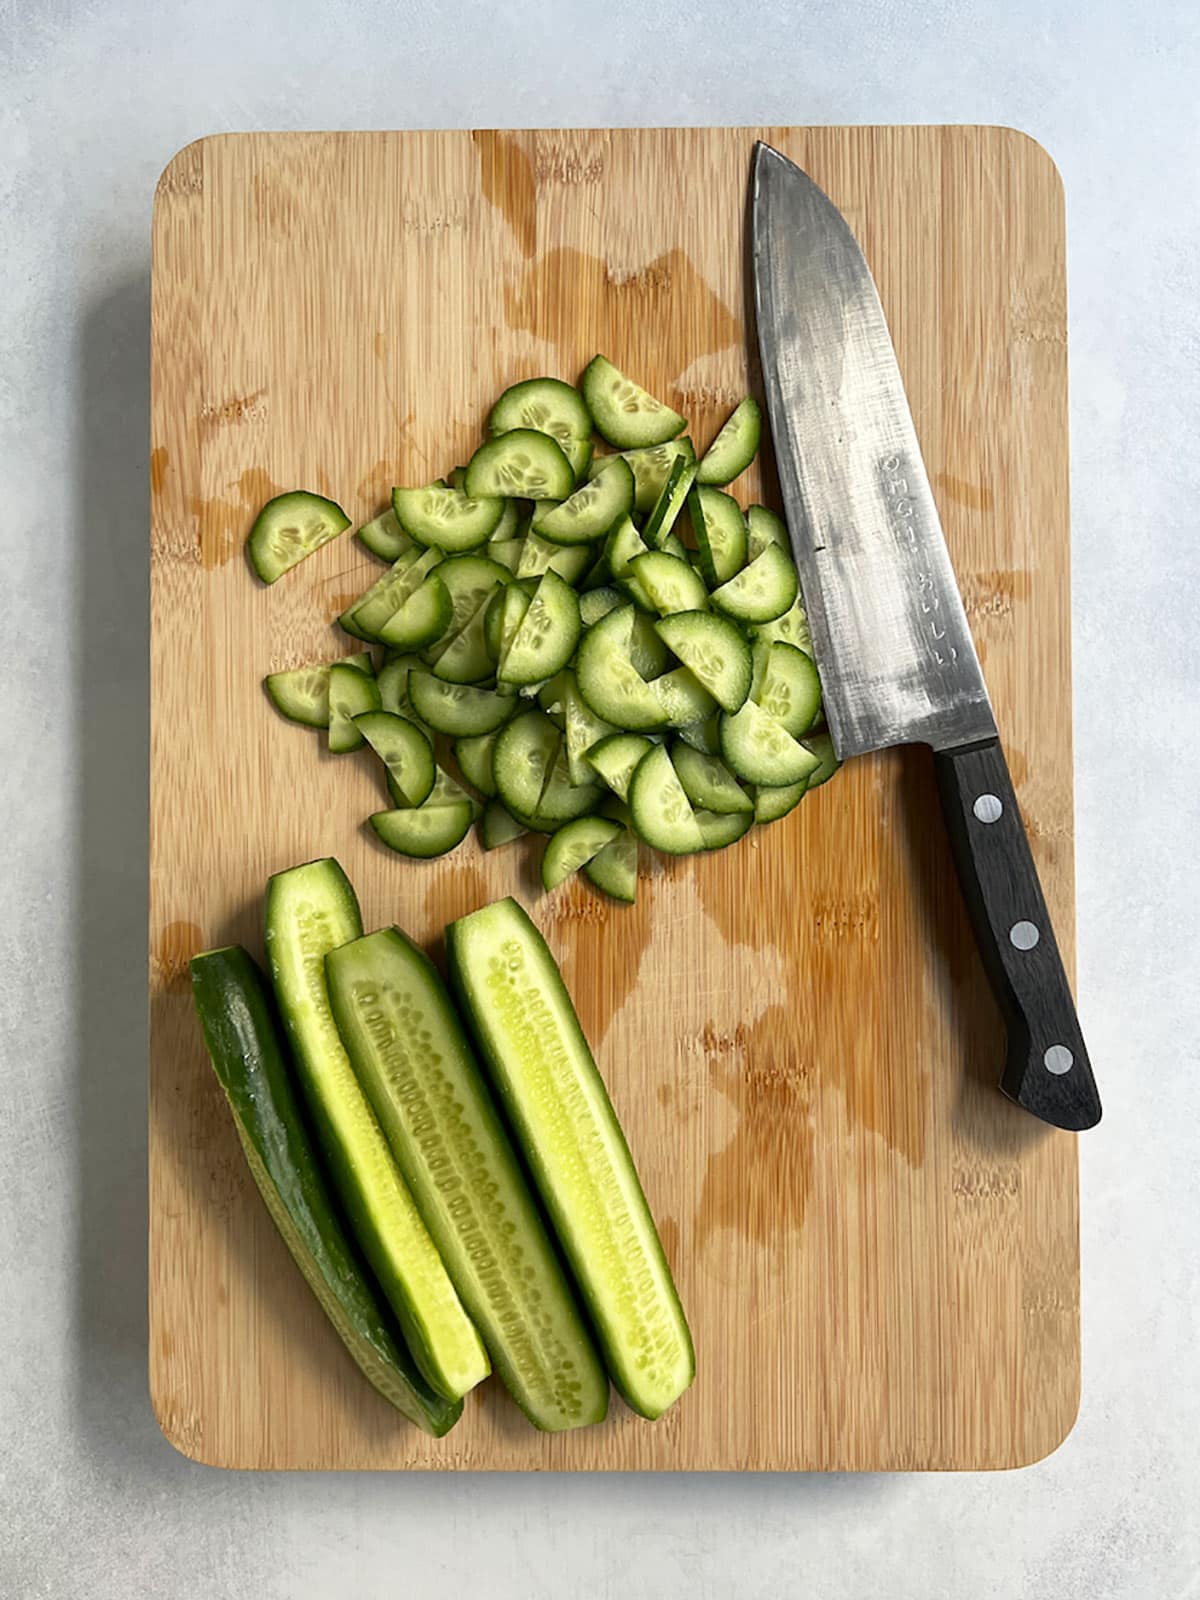 Cutting cucumbers on a wooden cutting board with a Japanese knife.